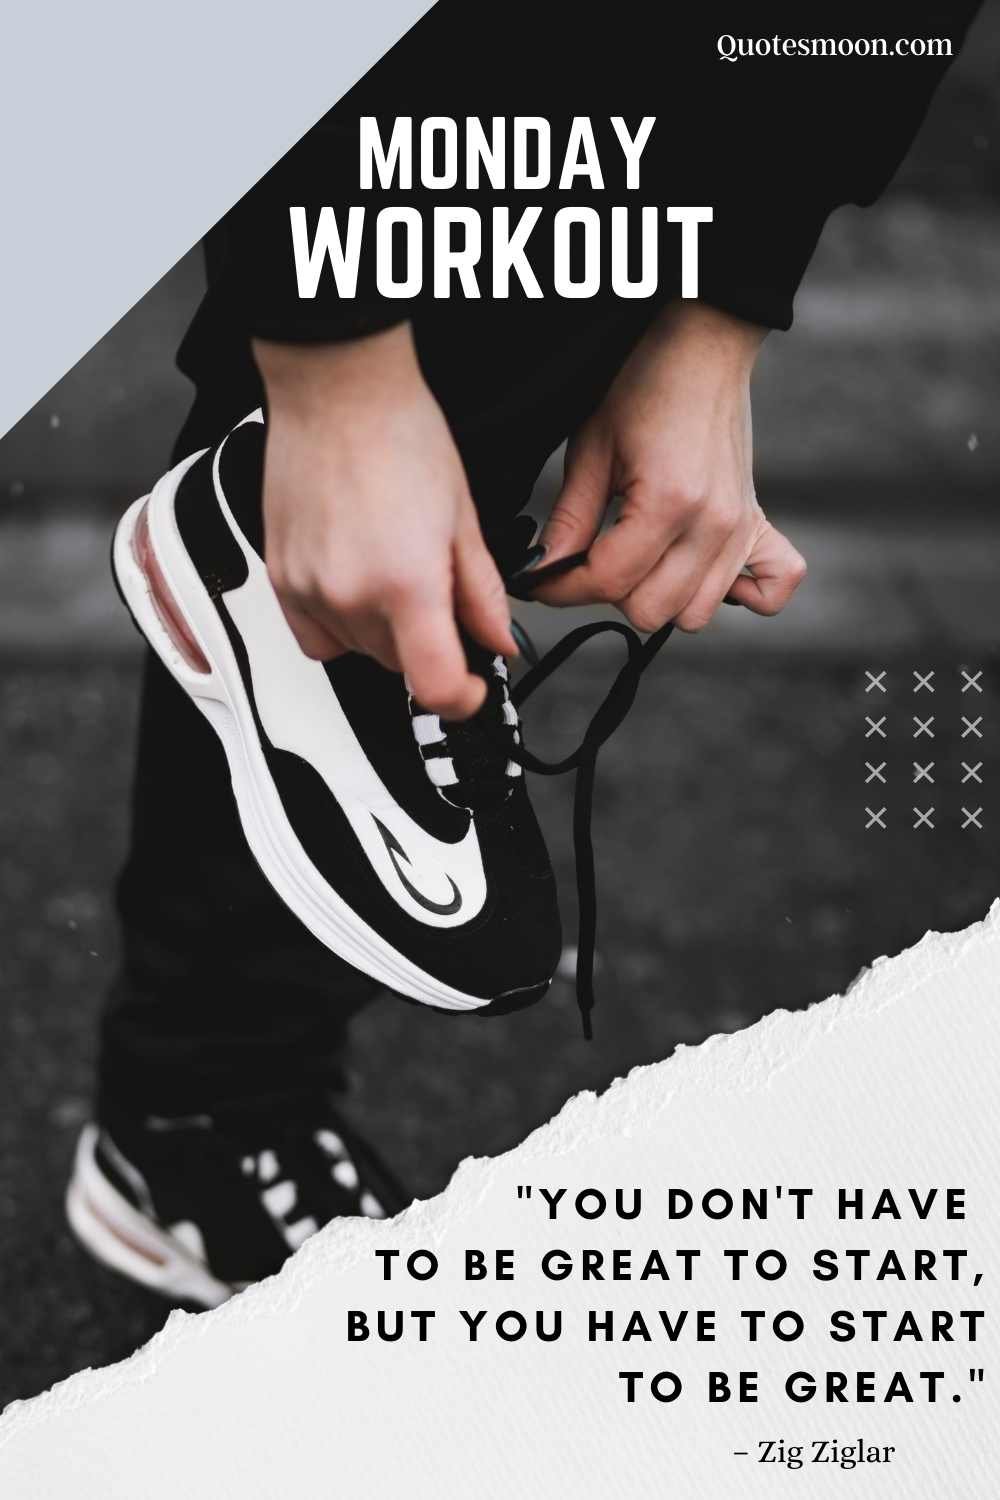 famous monday fitness quotes image